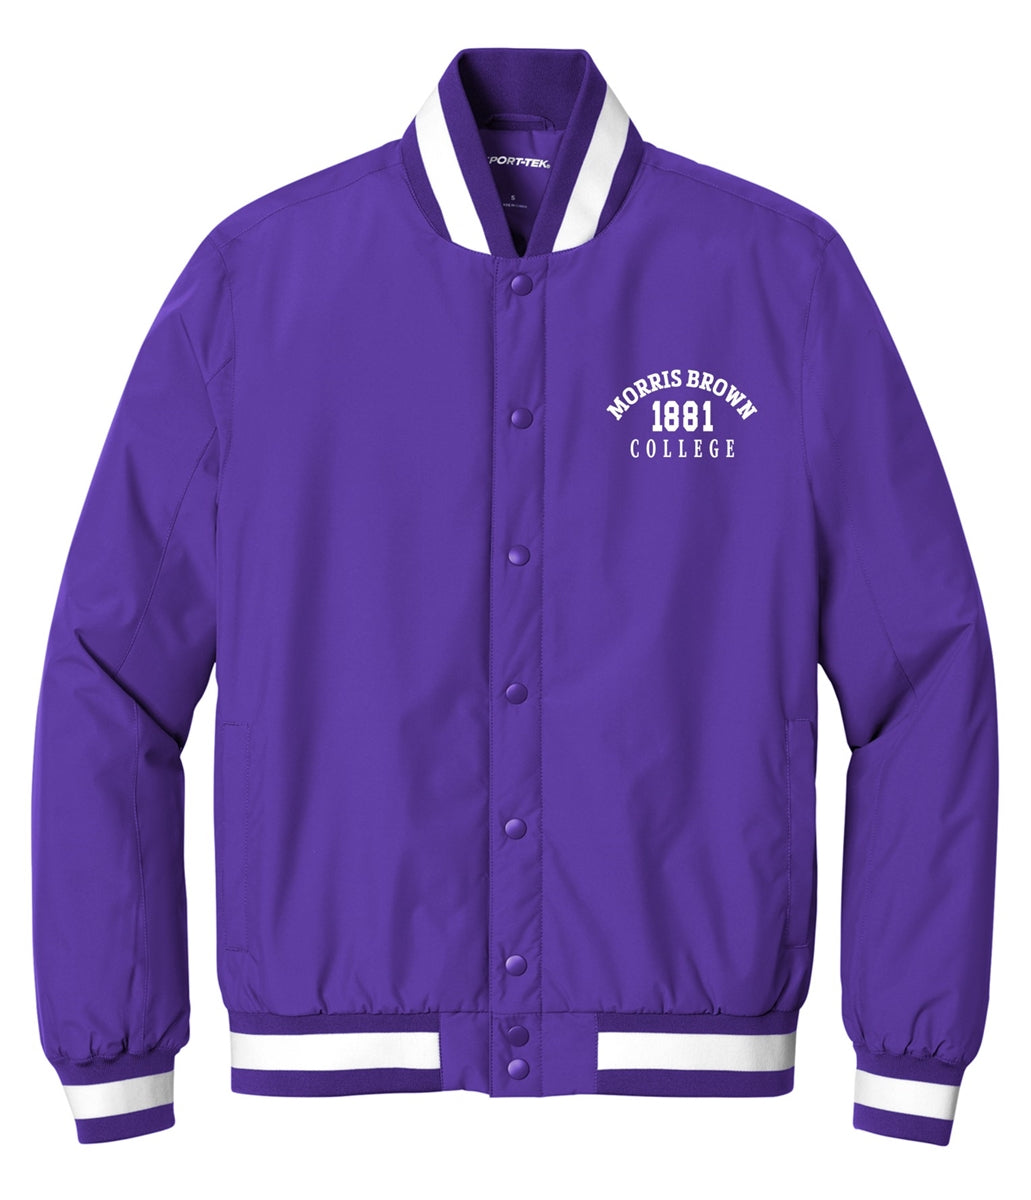 Morris Brown College Insulated Varsity Jacket